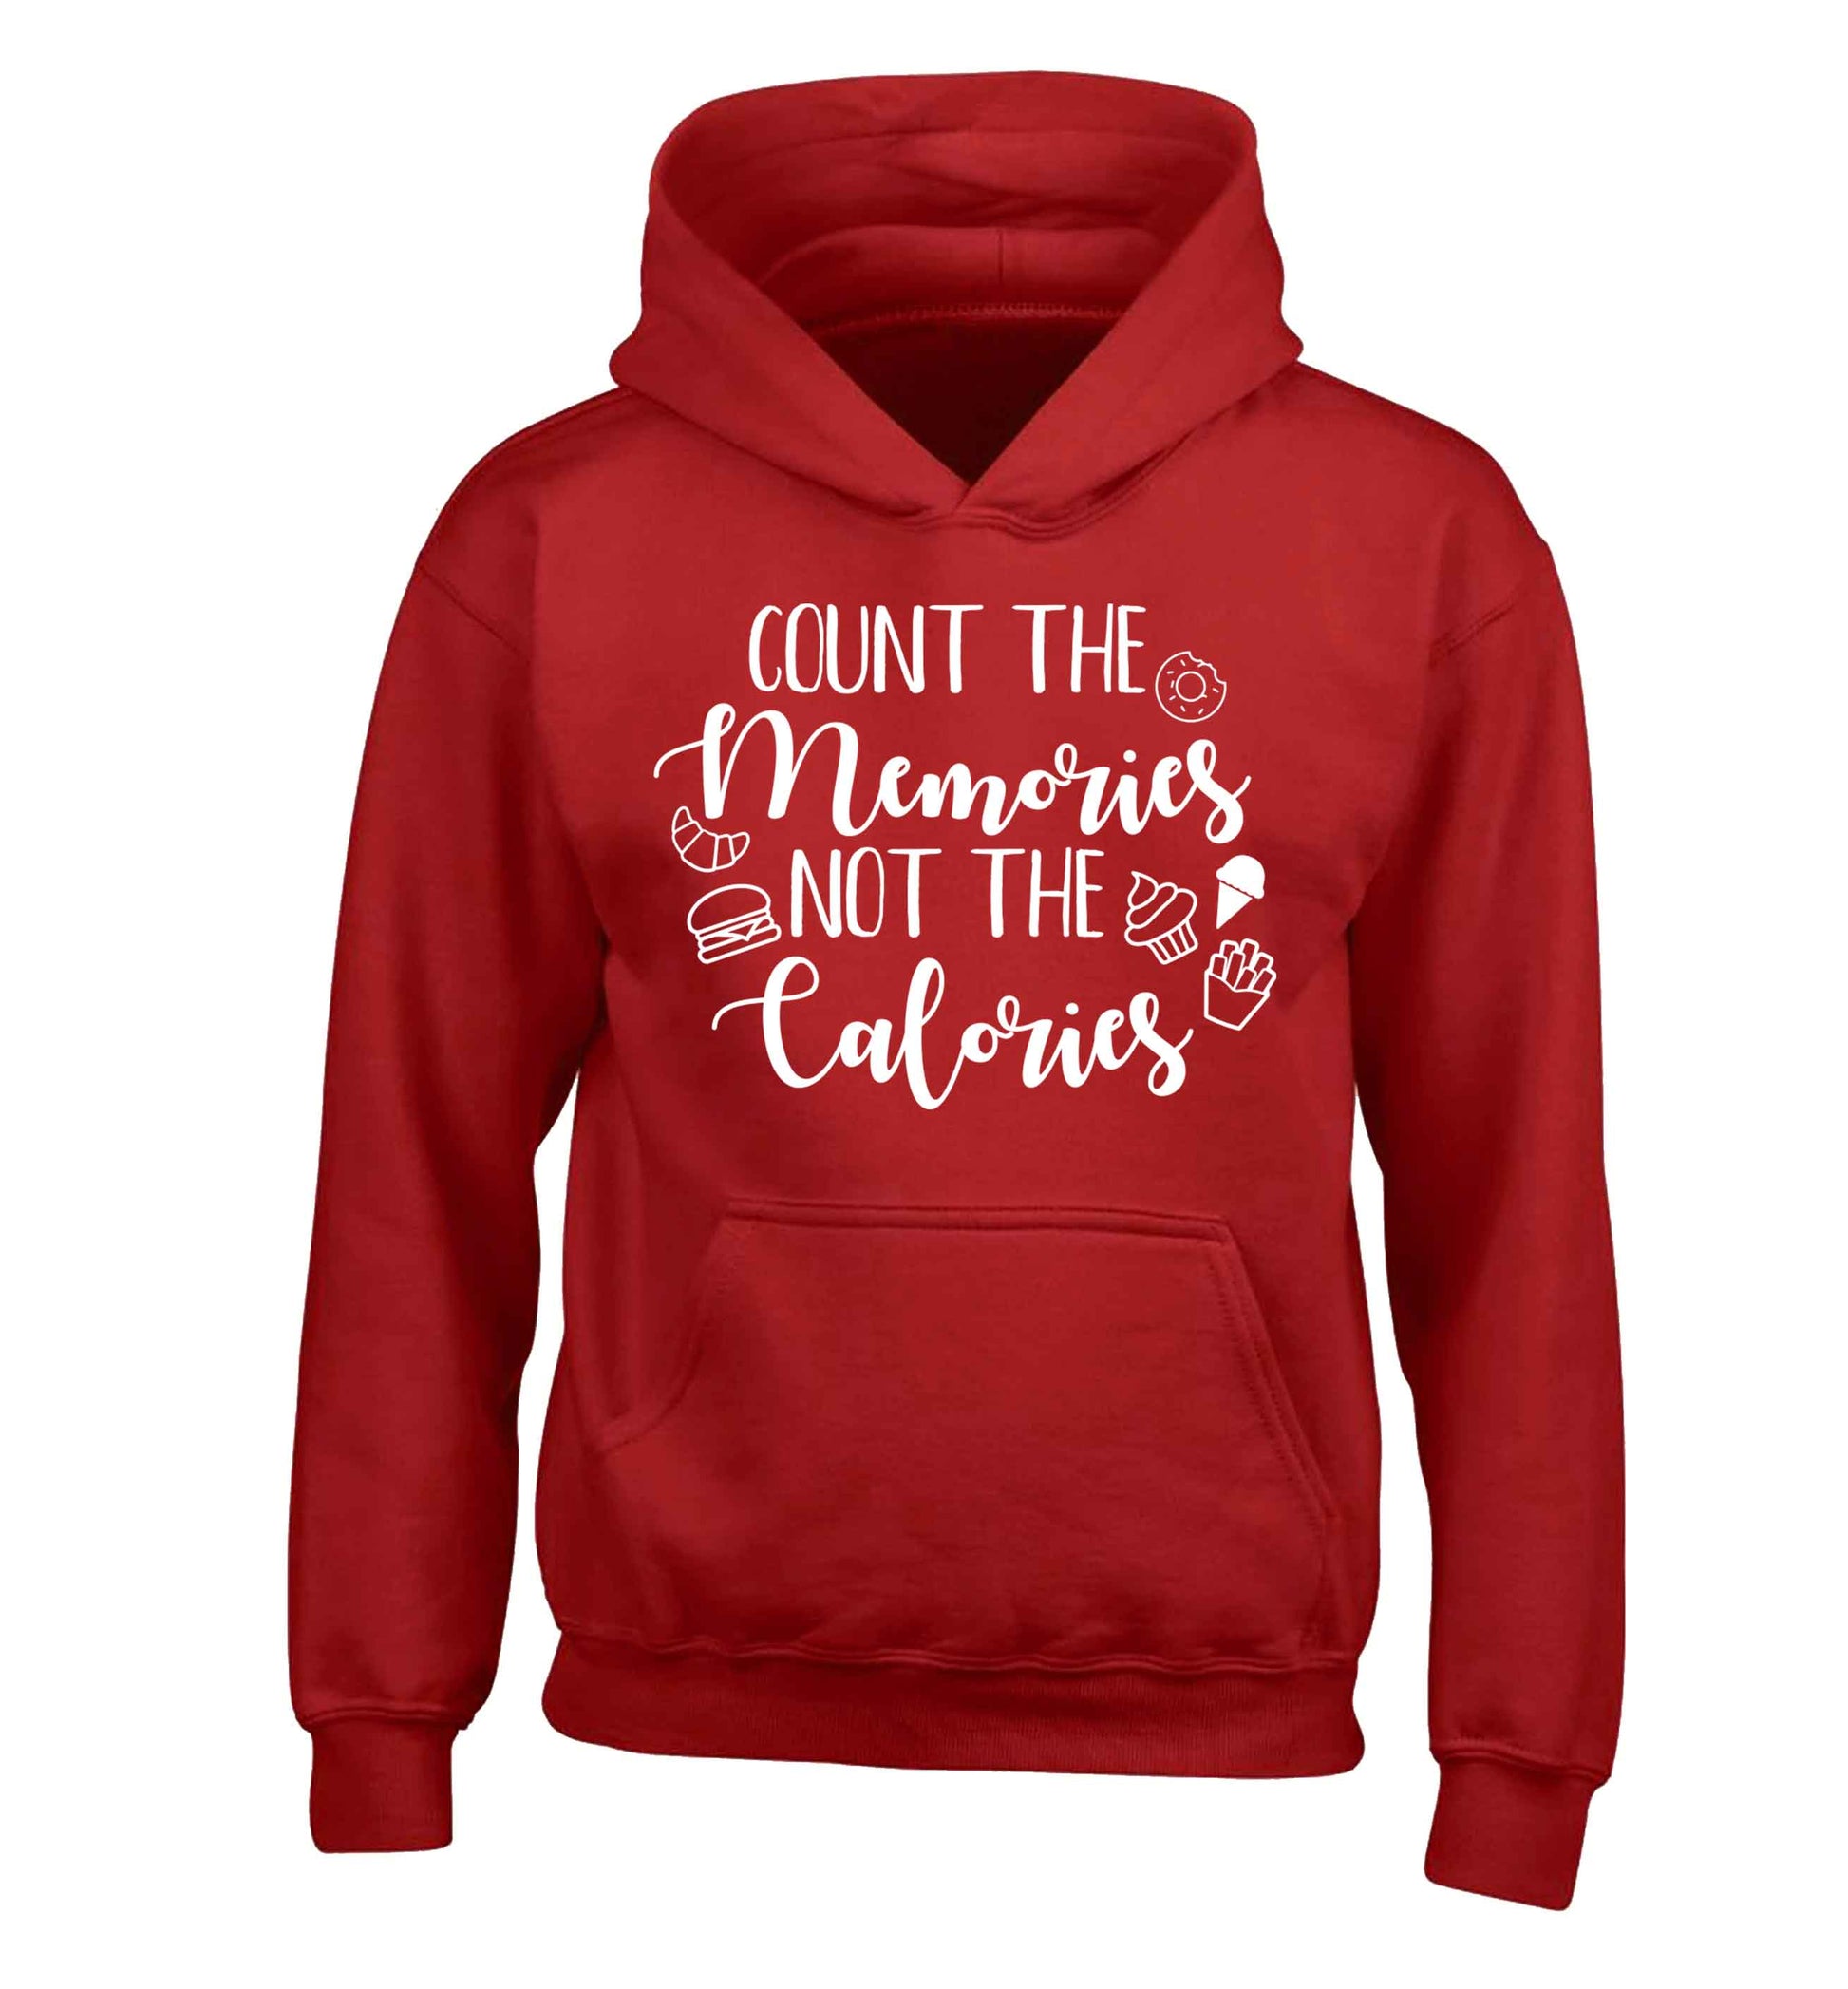 Count the memories not the calories children's red hoodie 12-13 Years